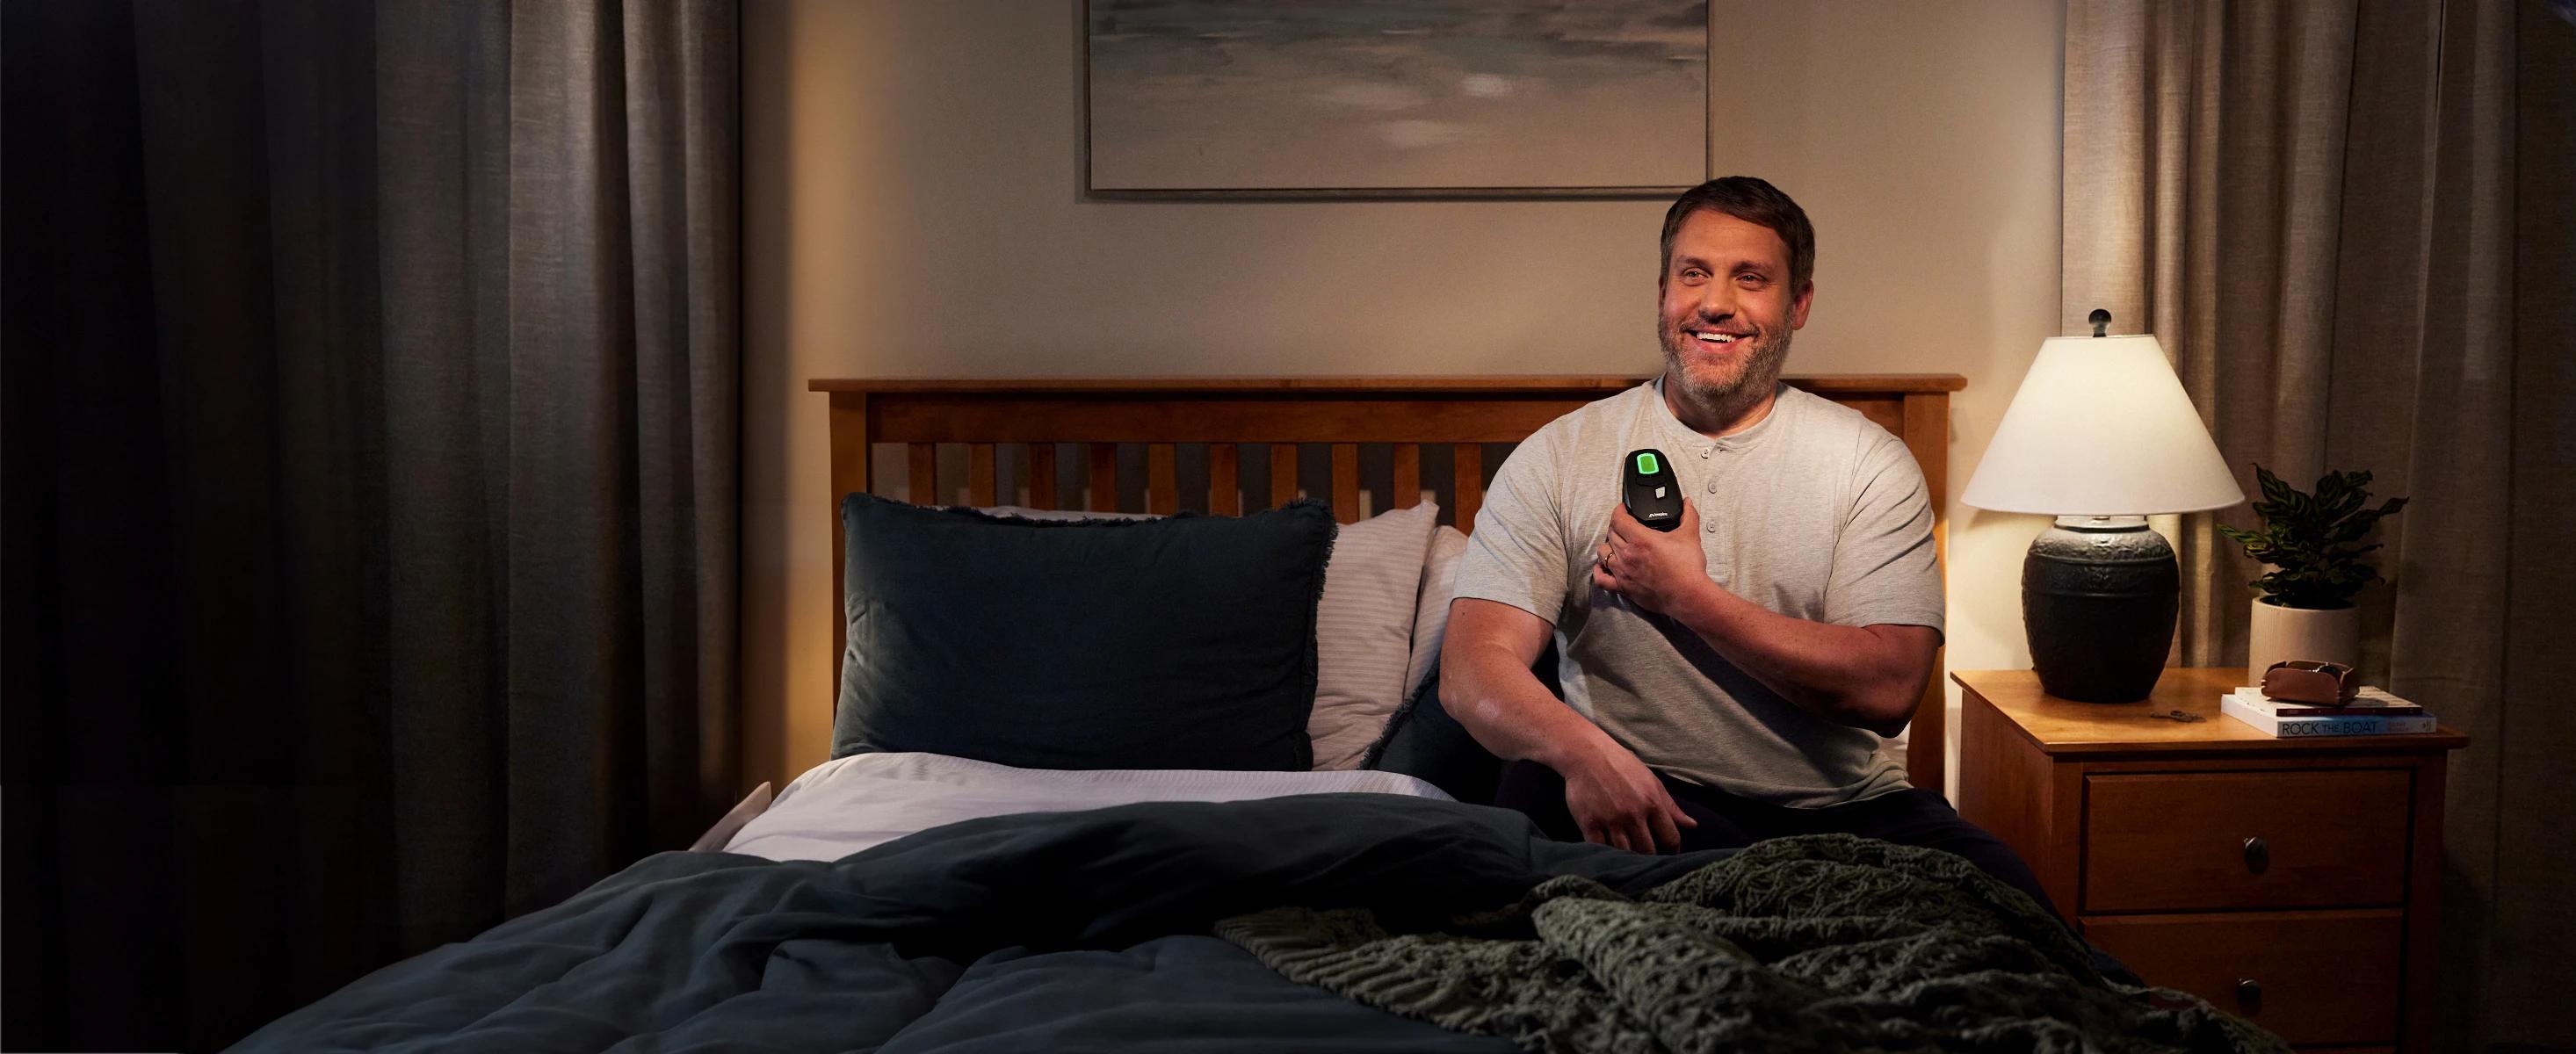 Smiling man in bed touching Inspire device